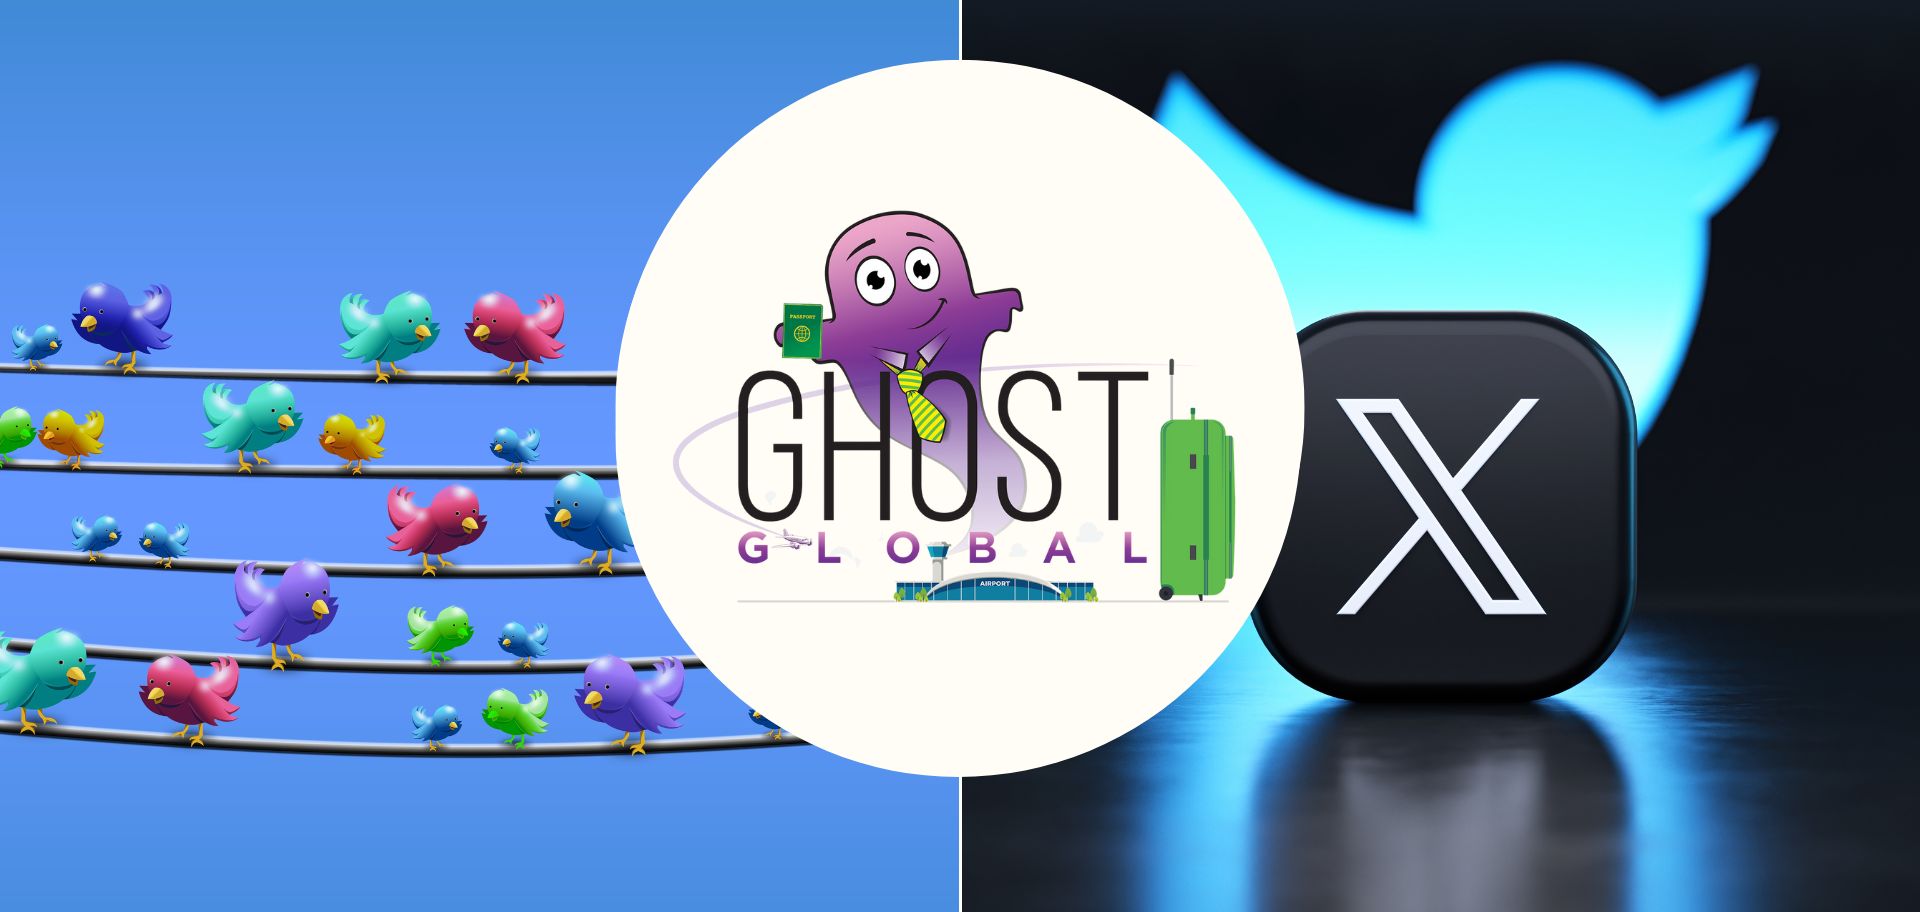 Ghost Global: What’s in a name?